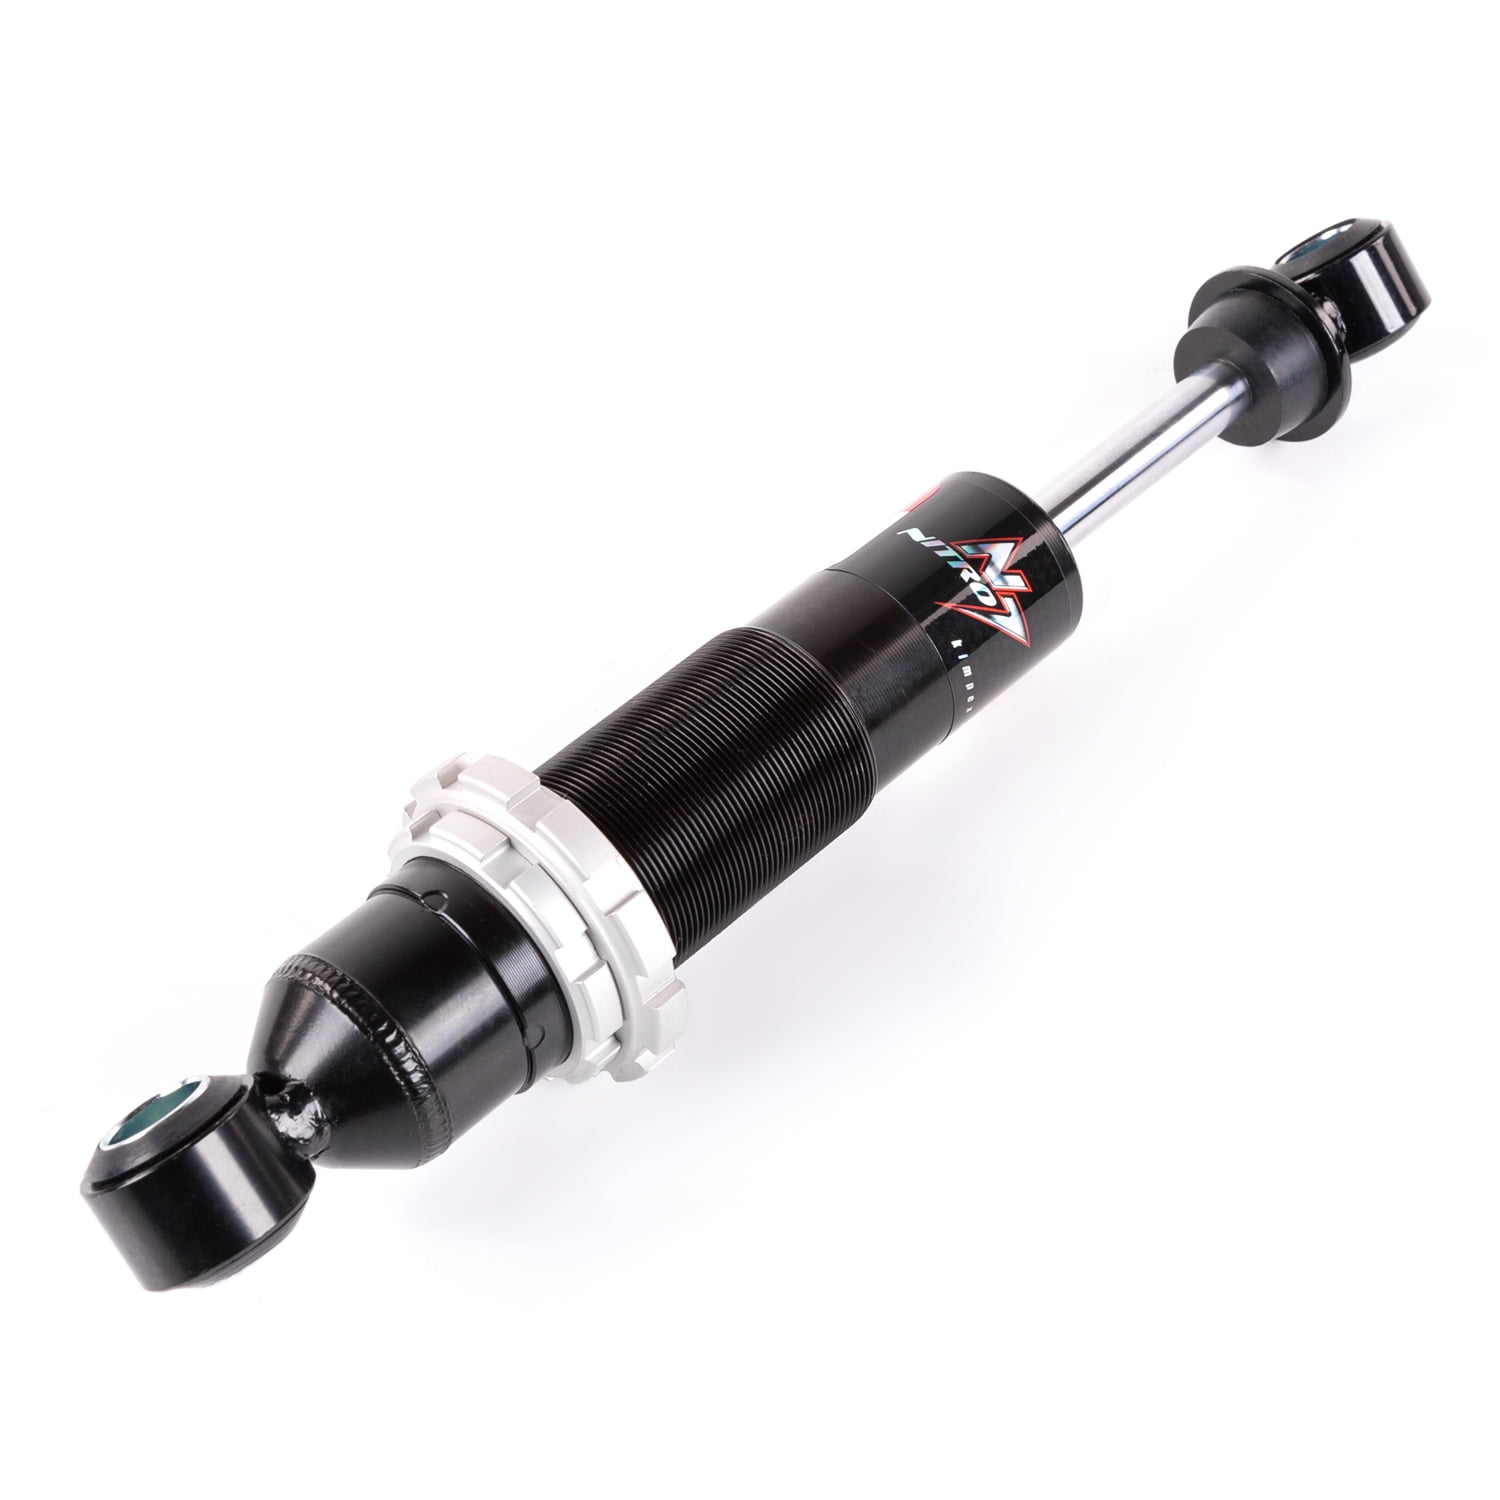 KIMPEX SHOCK ABSORBER ARCTIC 04-245